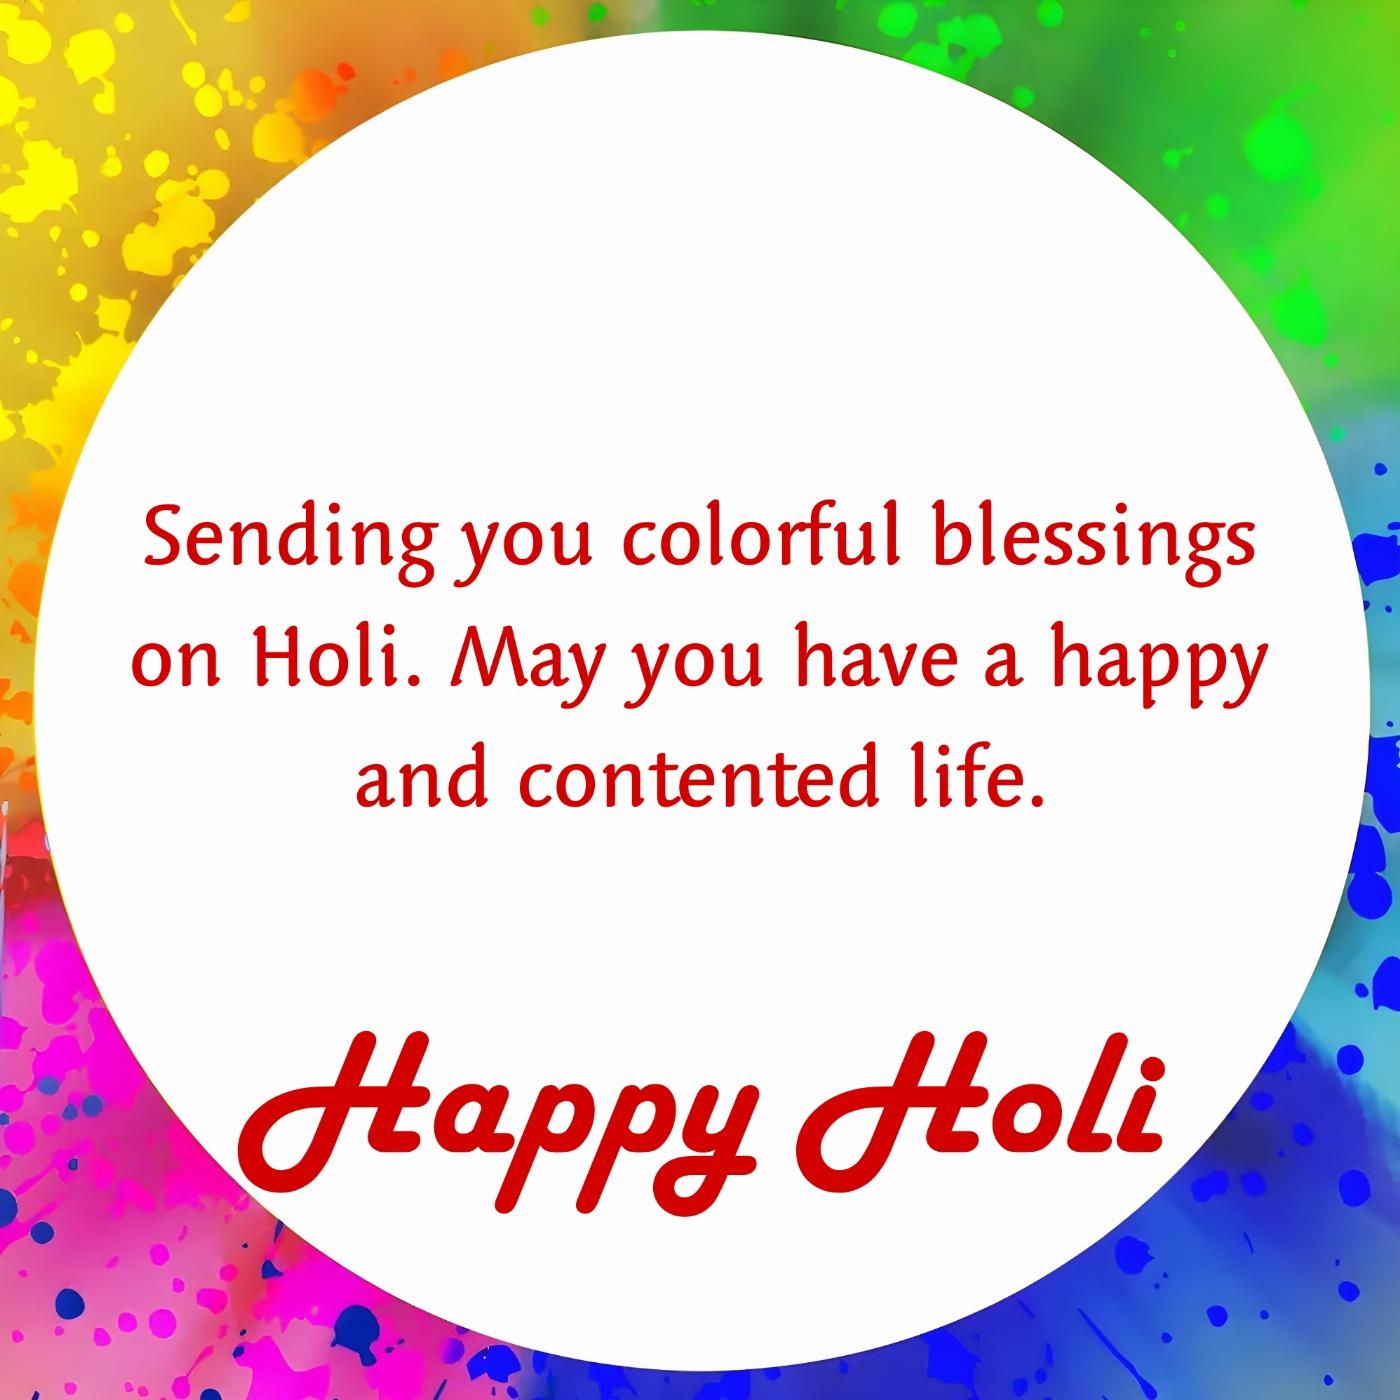 Sending you colorful blessings on Holi May you have a happy and contented life